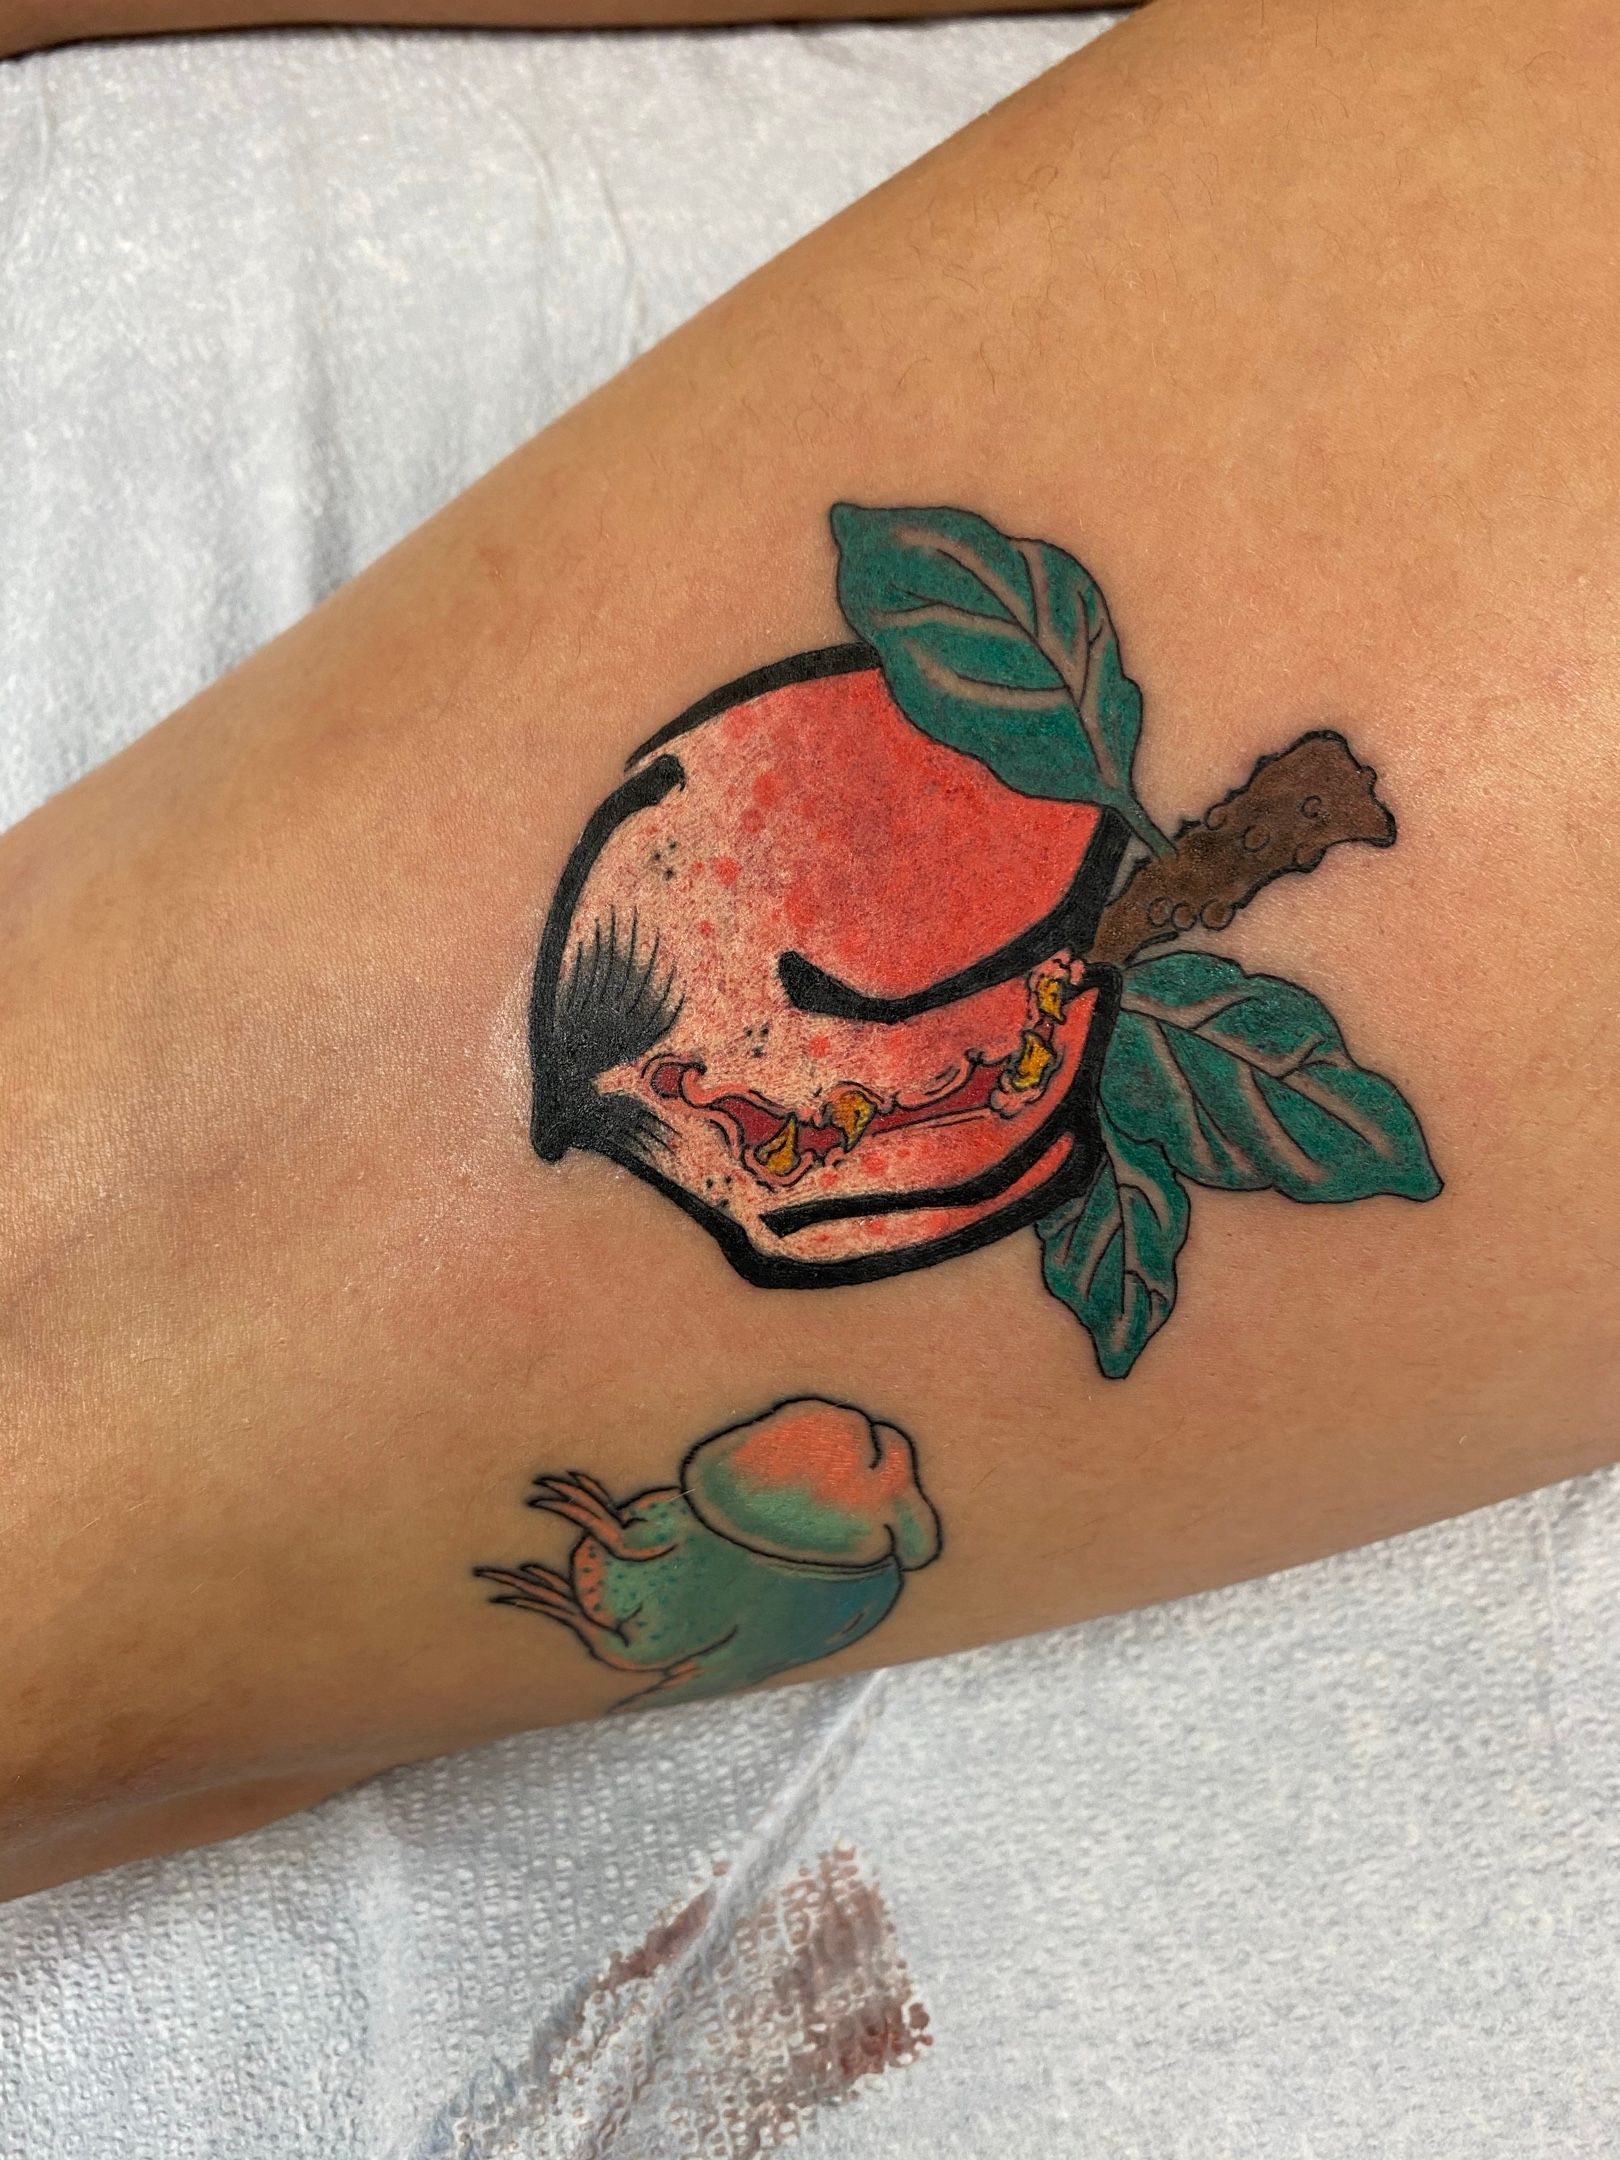 Sunset Tattoo  One peach tattoo done by TomTom